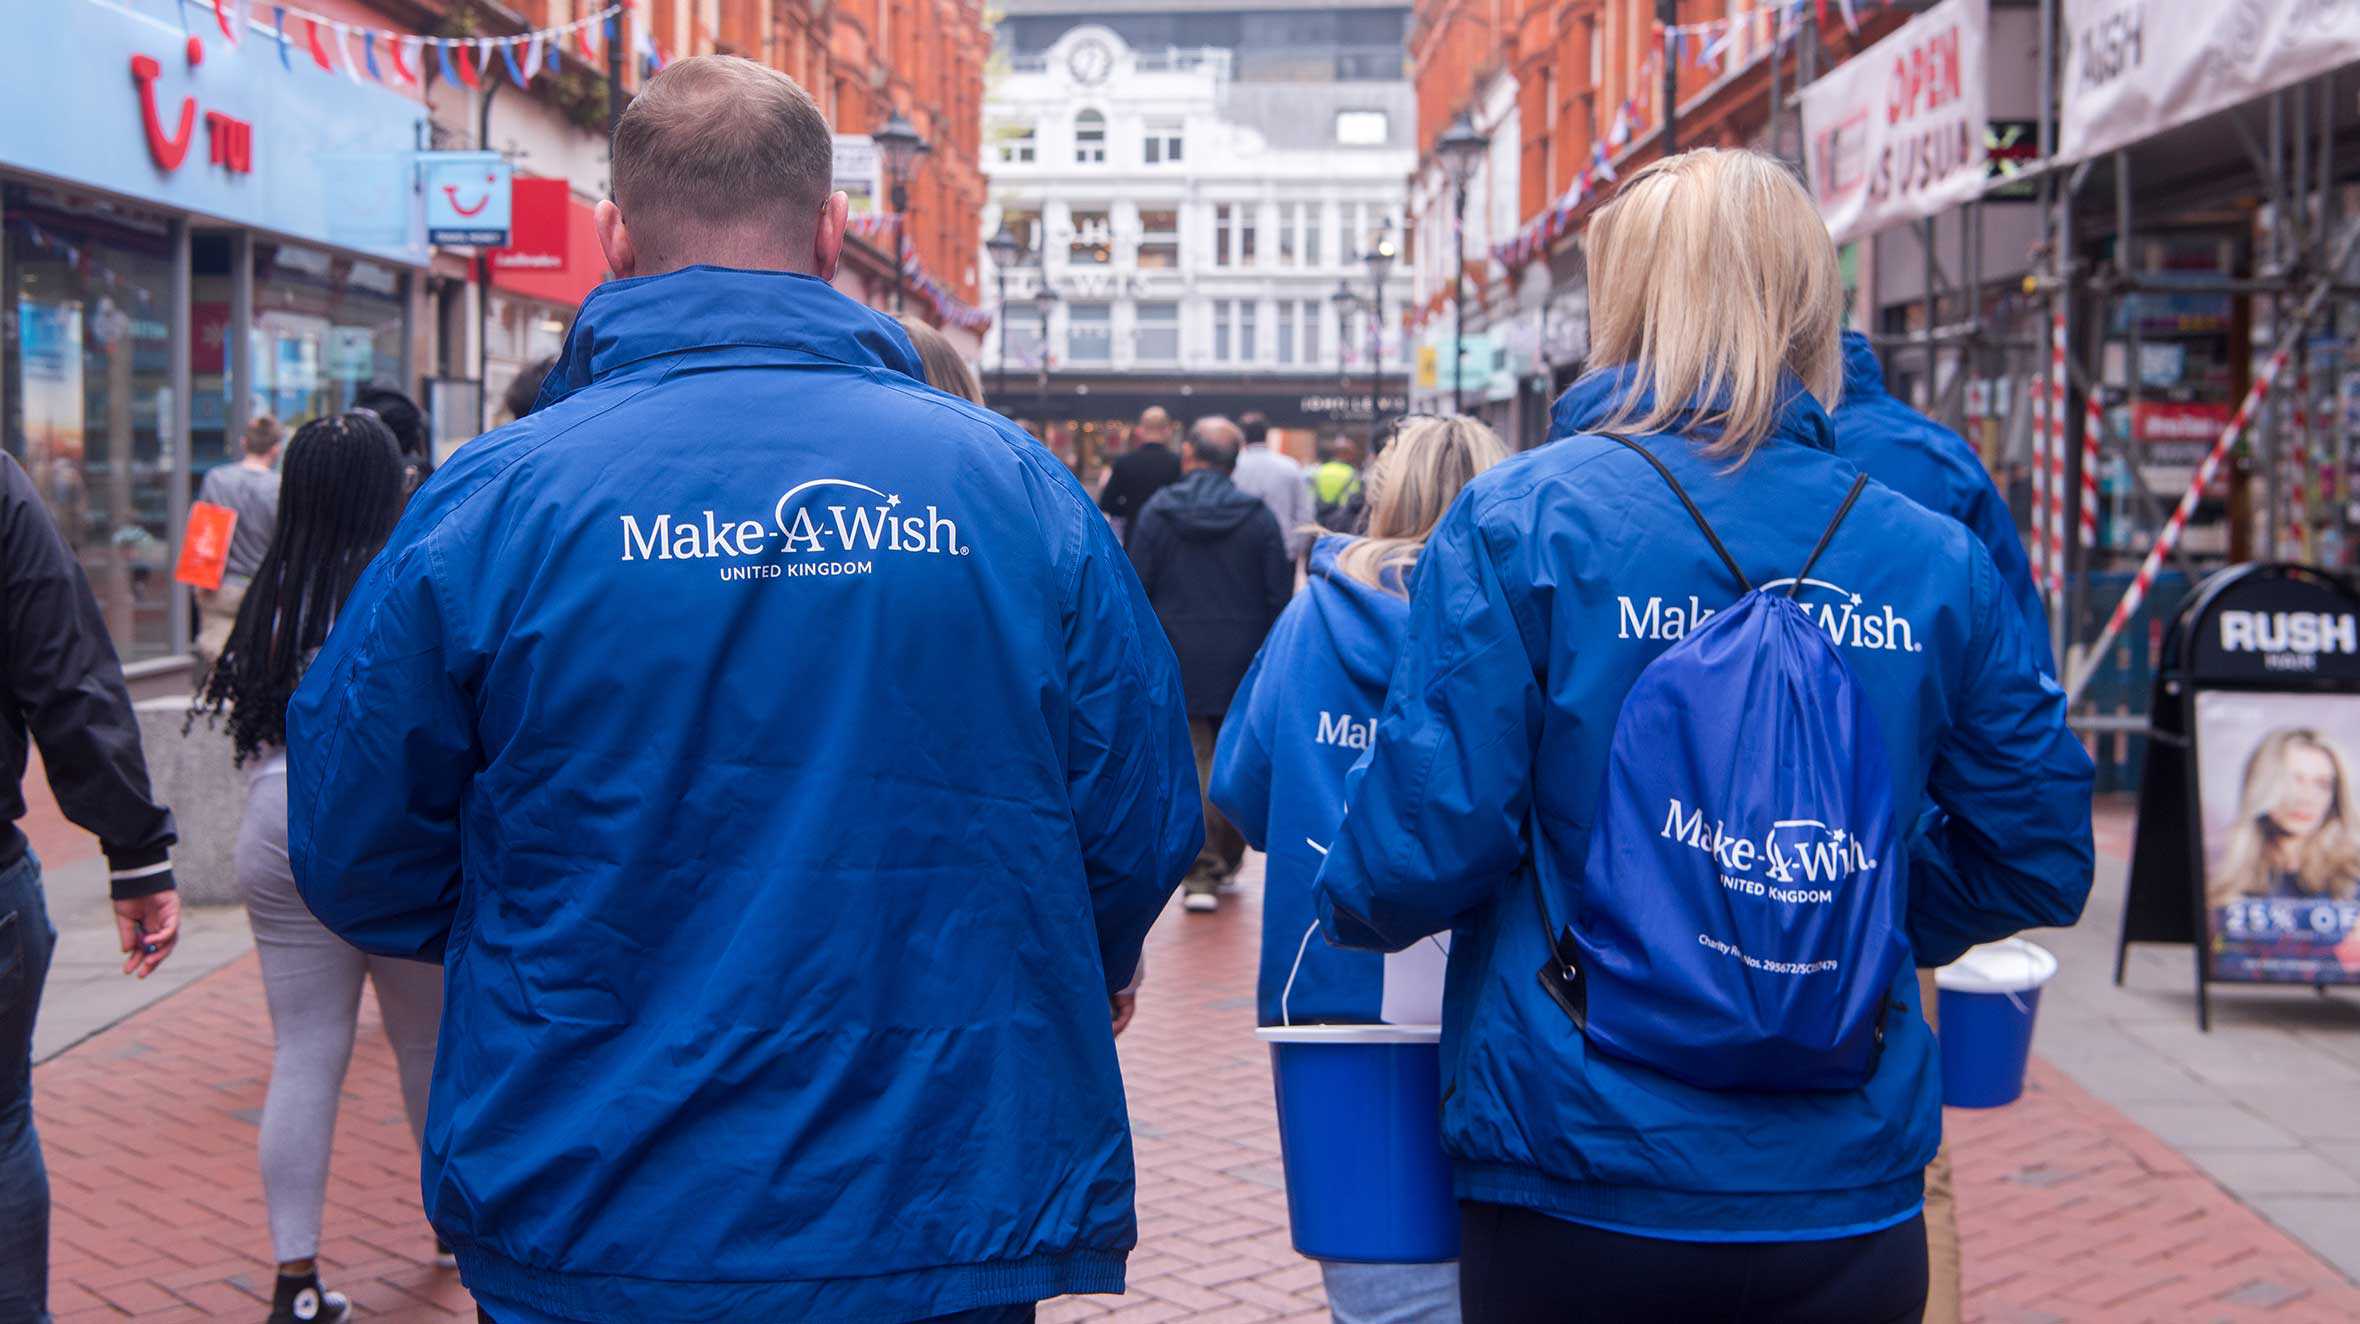 Rear view of Make-A-Wish Team members fundraising on the streets of Reading.